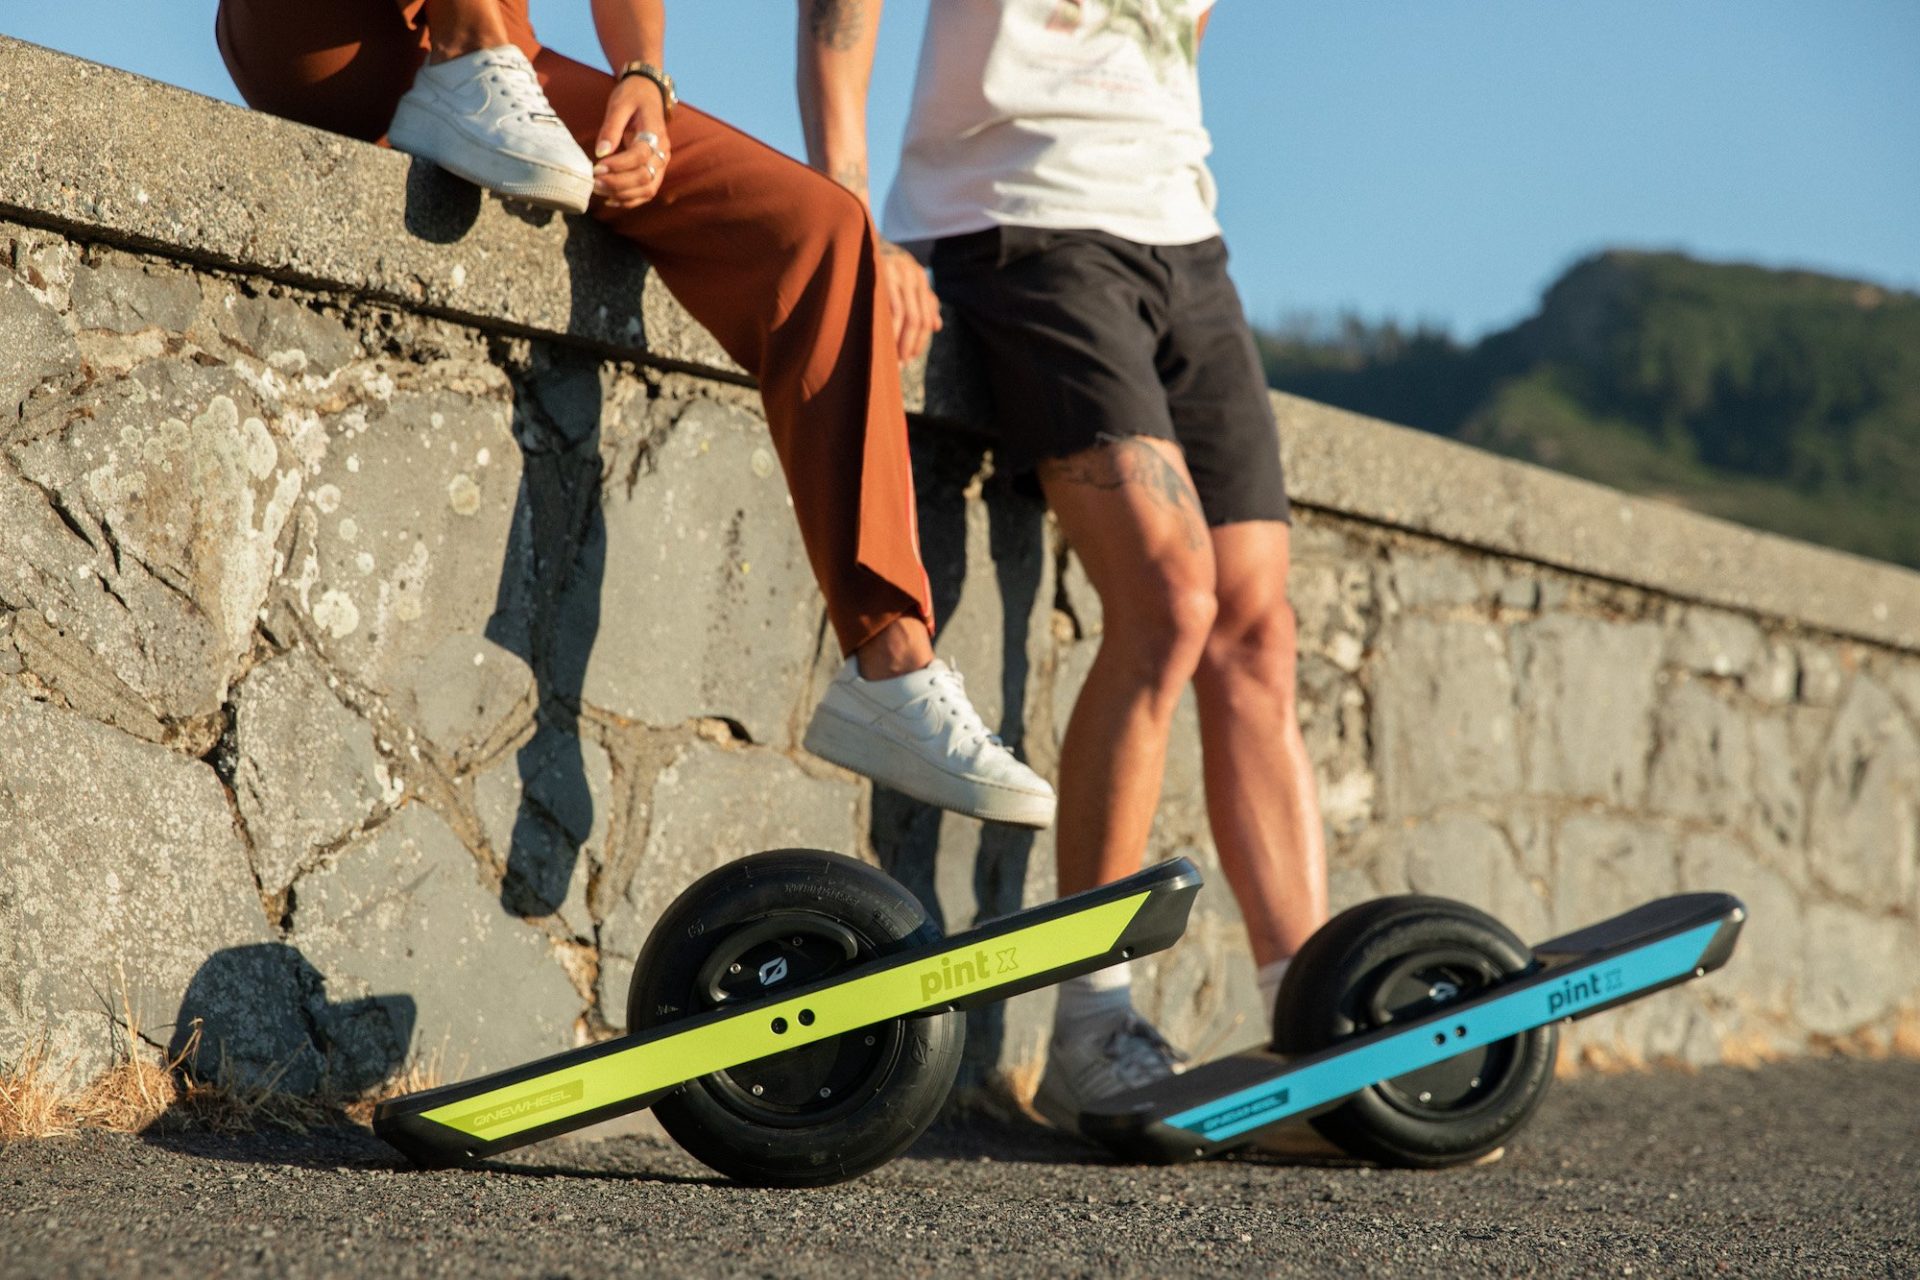 Onewheel Pint gets an upgrade in the new Onewheel Pint X.